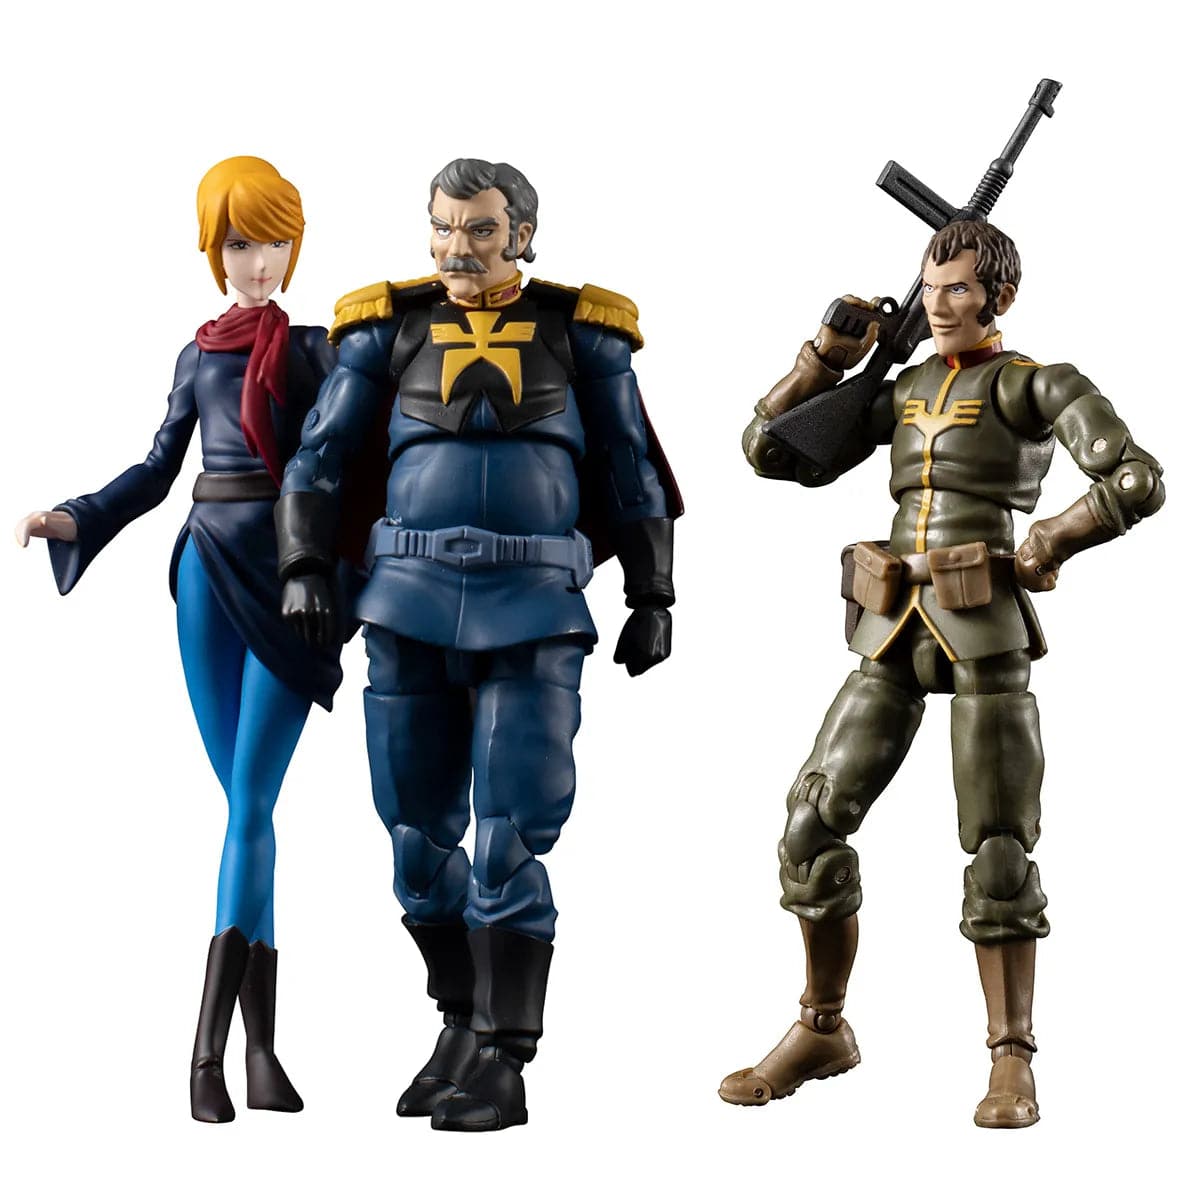 Megahouse Mobile Suit Gundam G.M.G. (Gundam Military Generation) Principality of Zeon Team Ramba Ral set ( with gift : extra props )